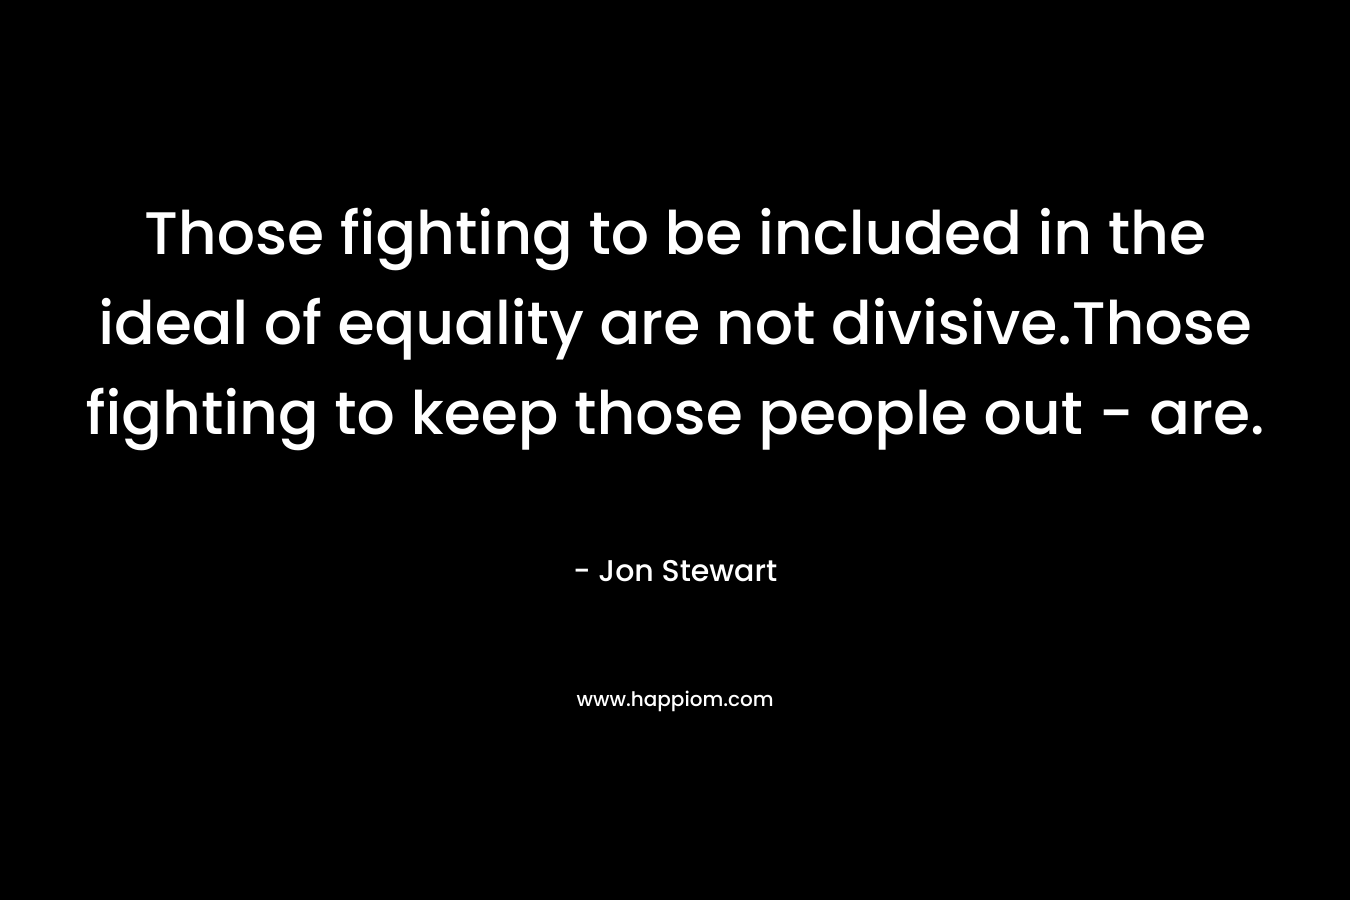 Those fighting to be included in the ideal of equality are not divisive.Those fighting to keep those people out - are.